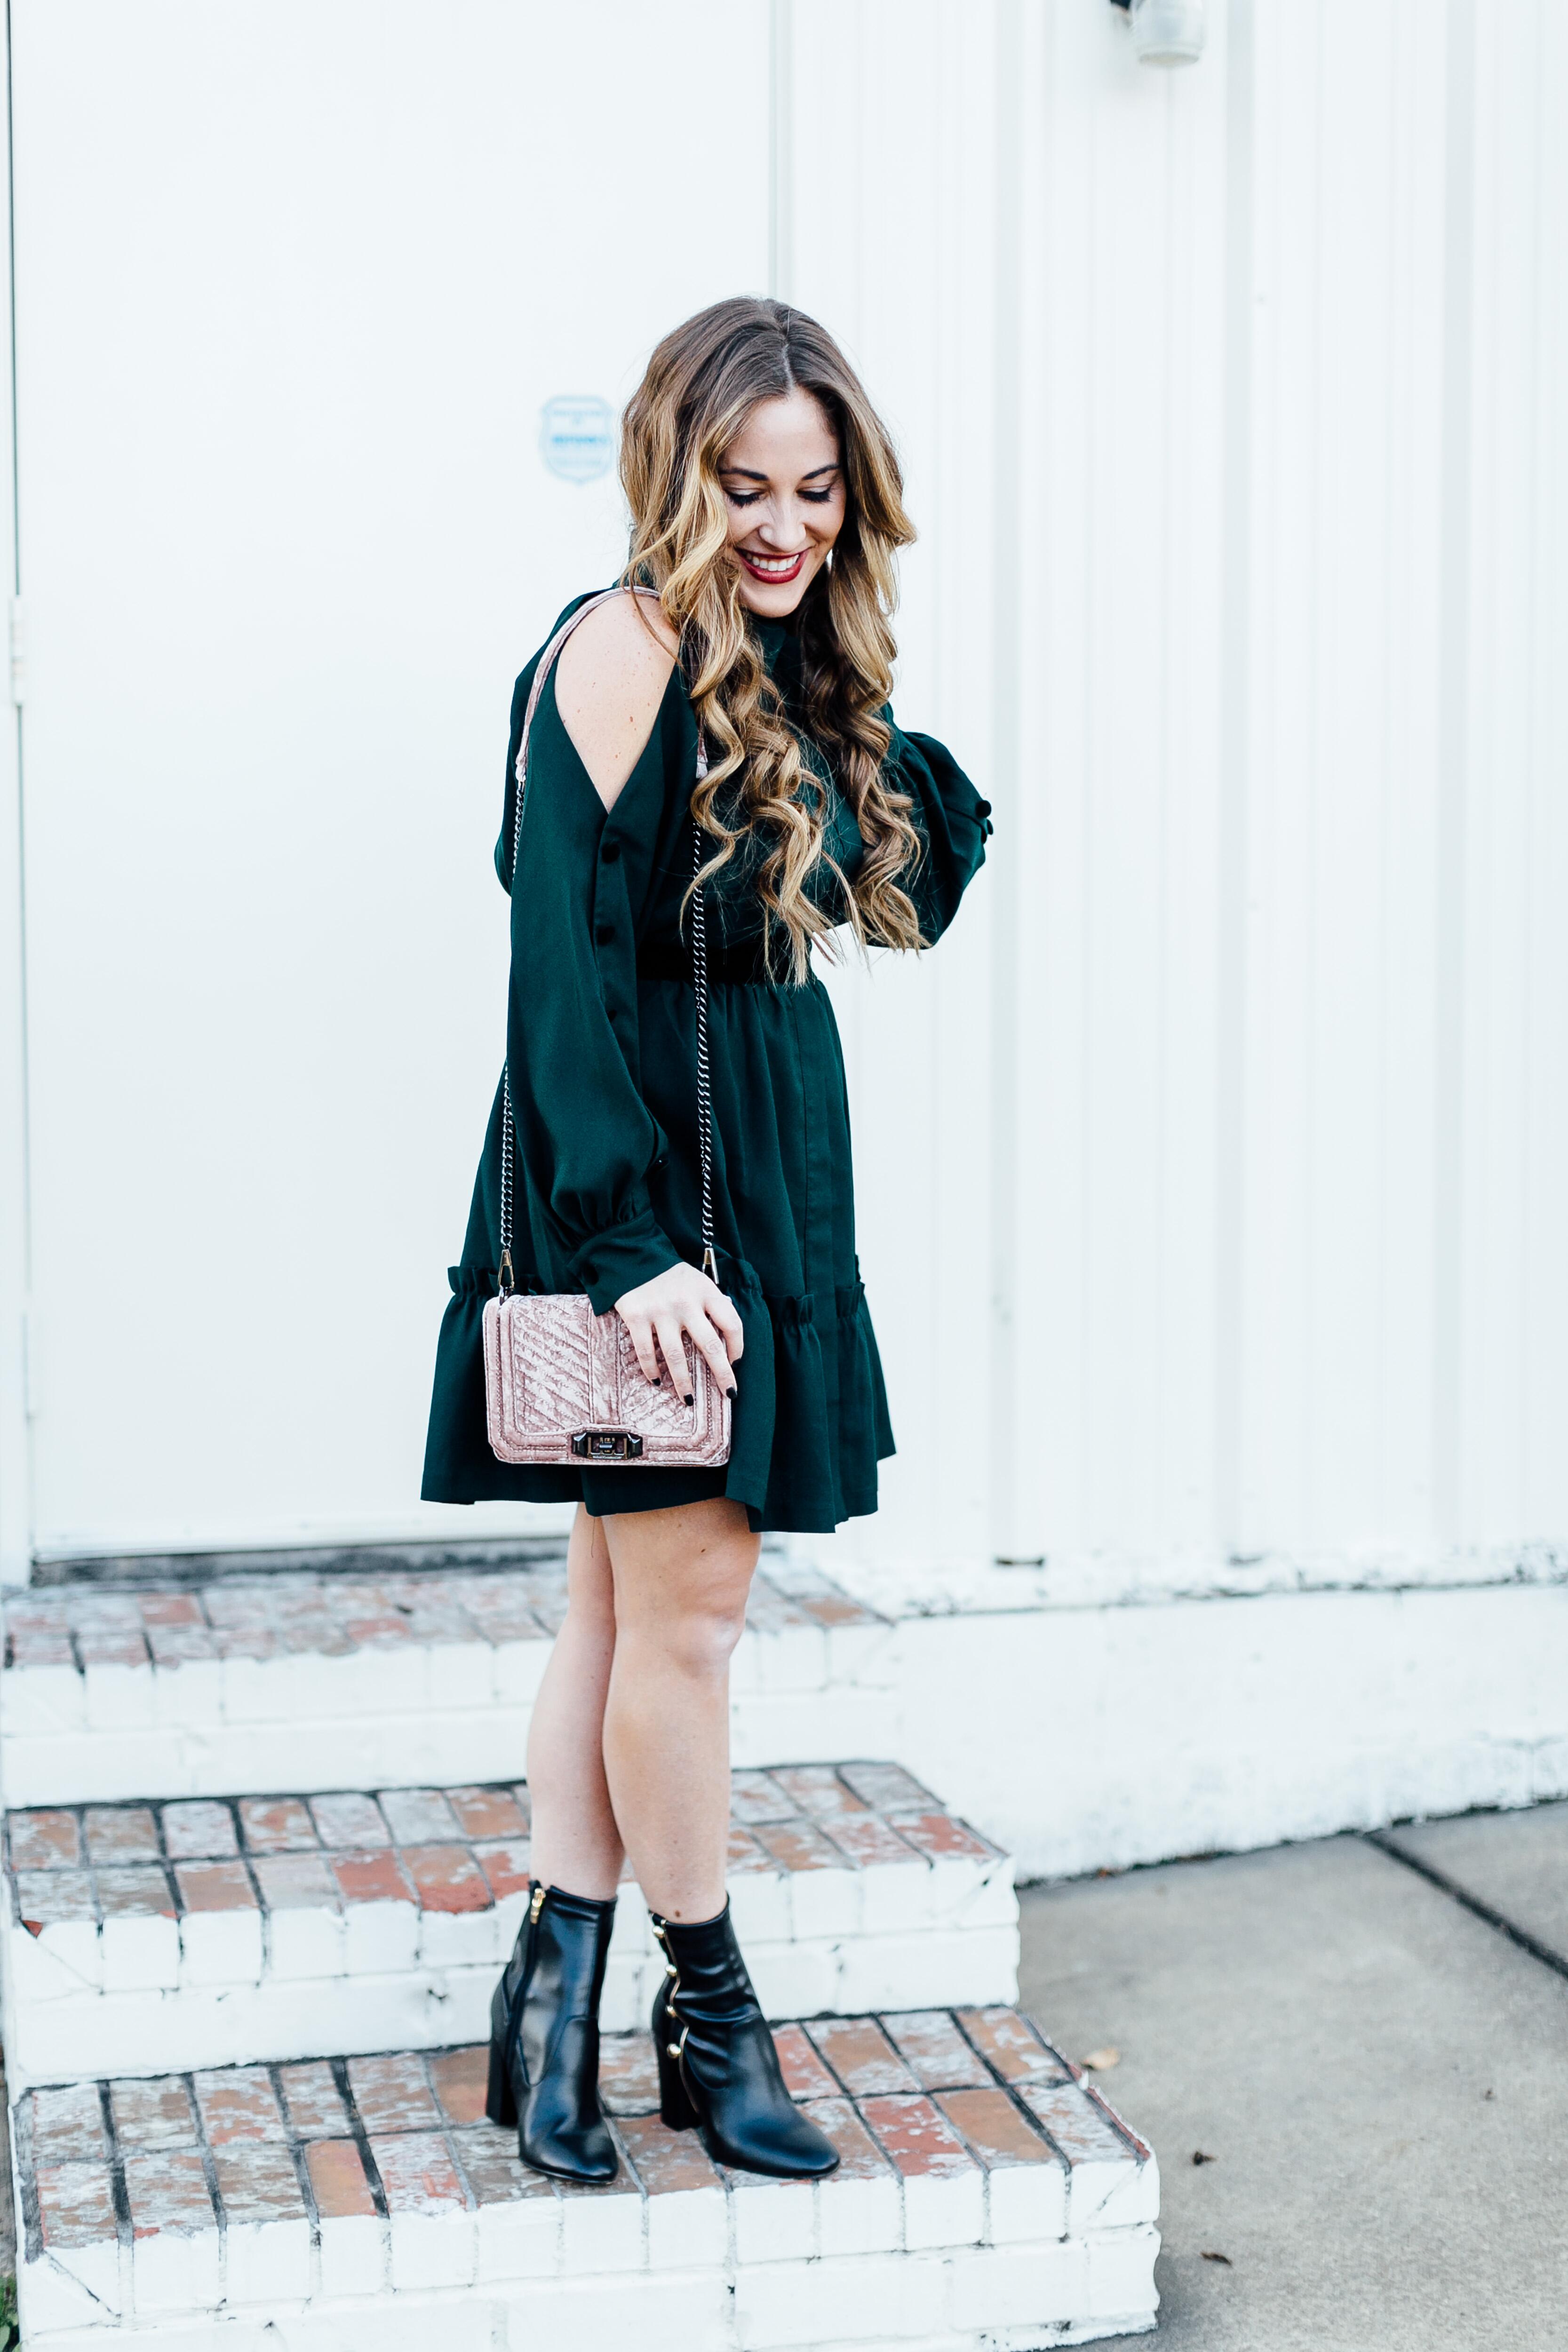 Thanksgiving Outfit Blog Hop by East Memphis fashion blogger Walking in Memphis in High Heels